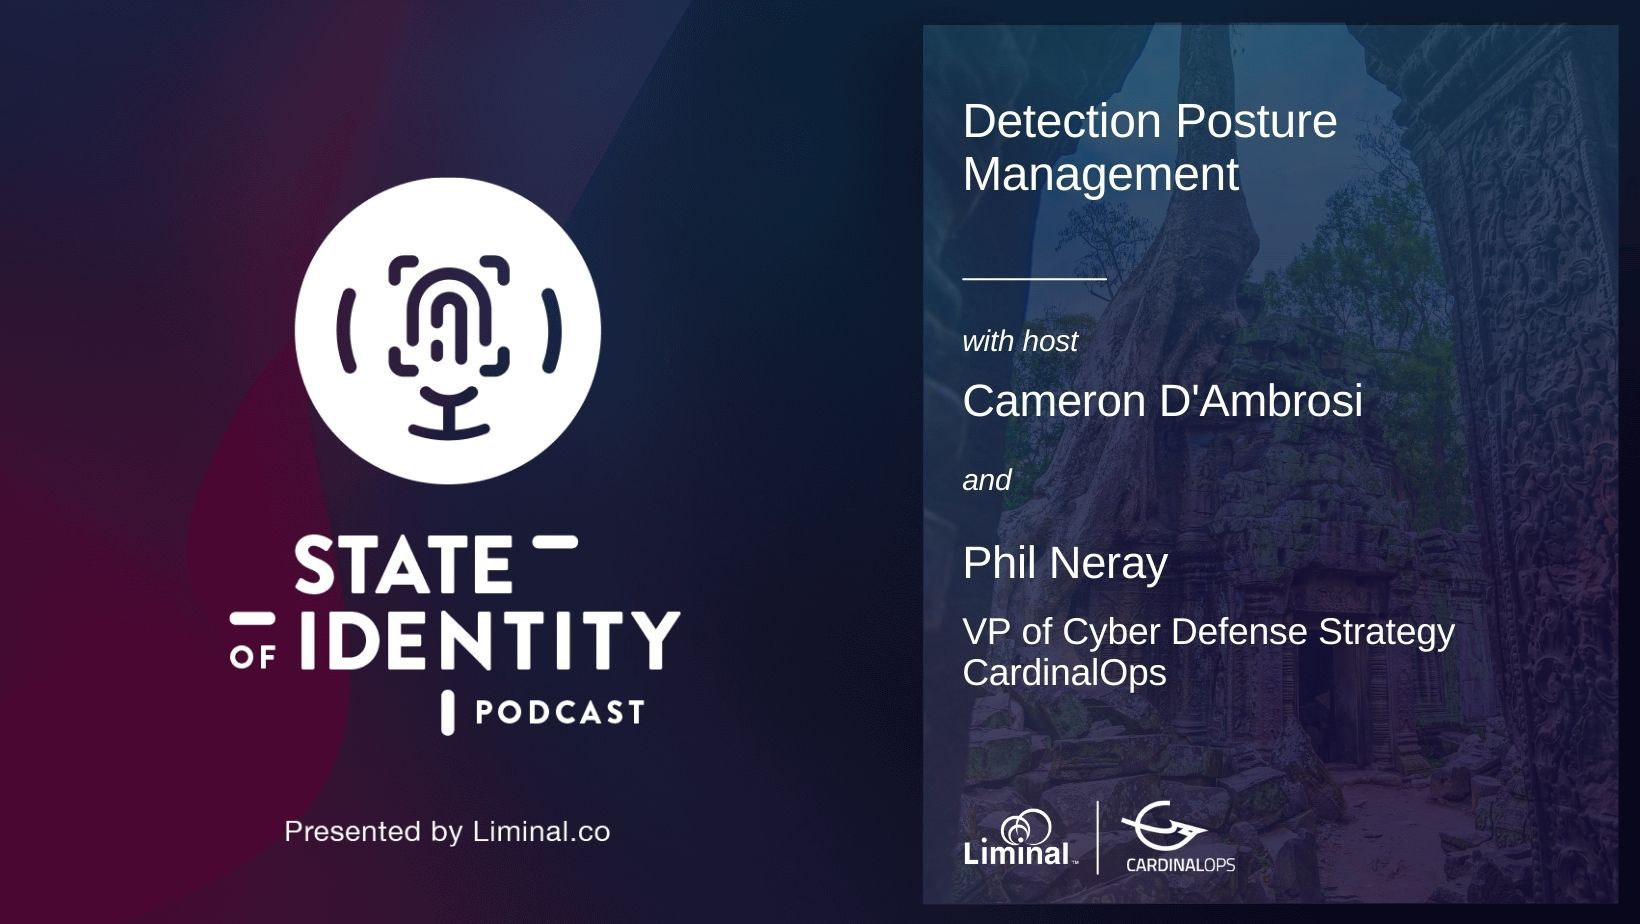 State of Identity Podcast Episode 320: Detection Posture Management